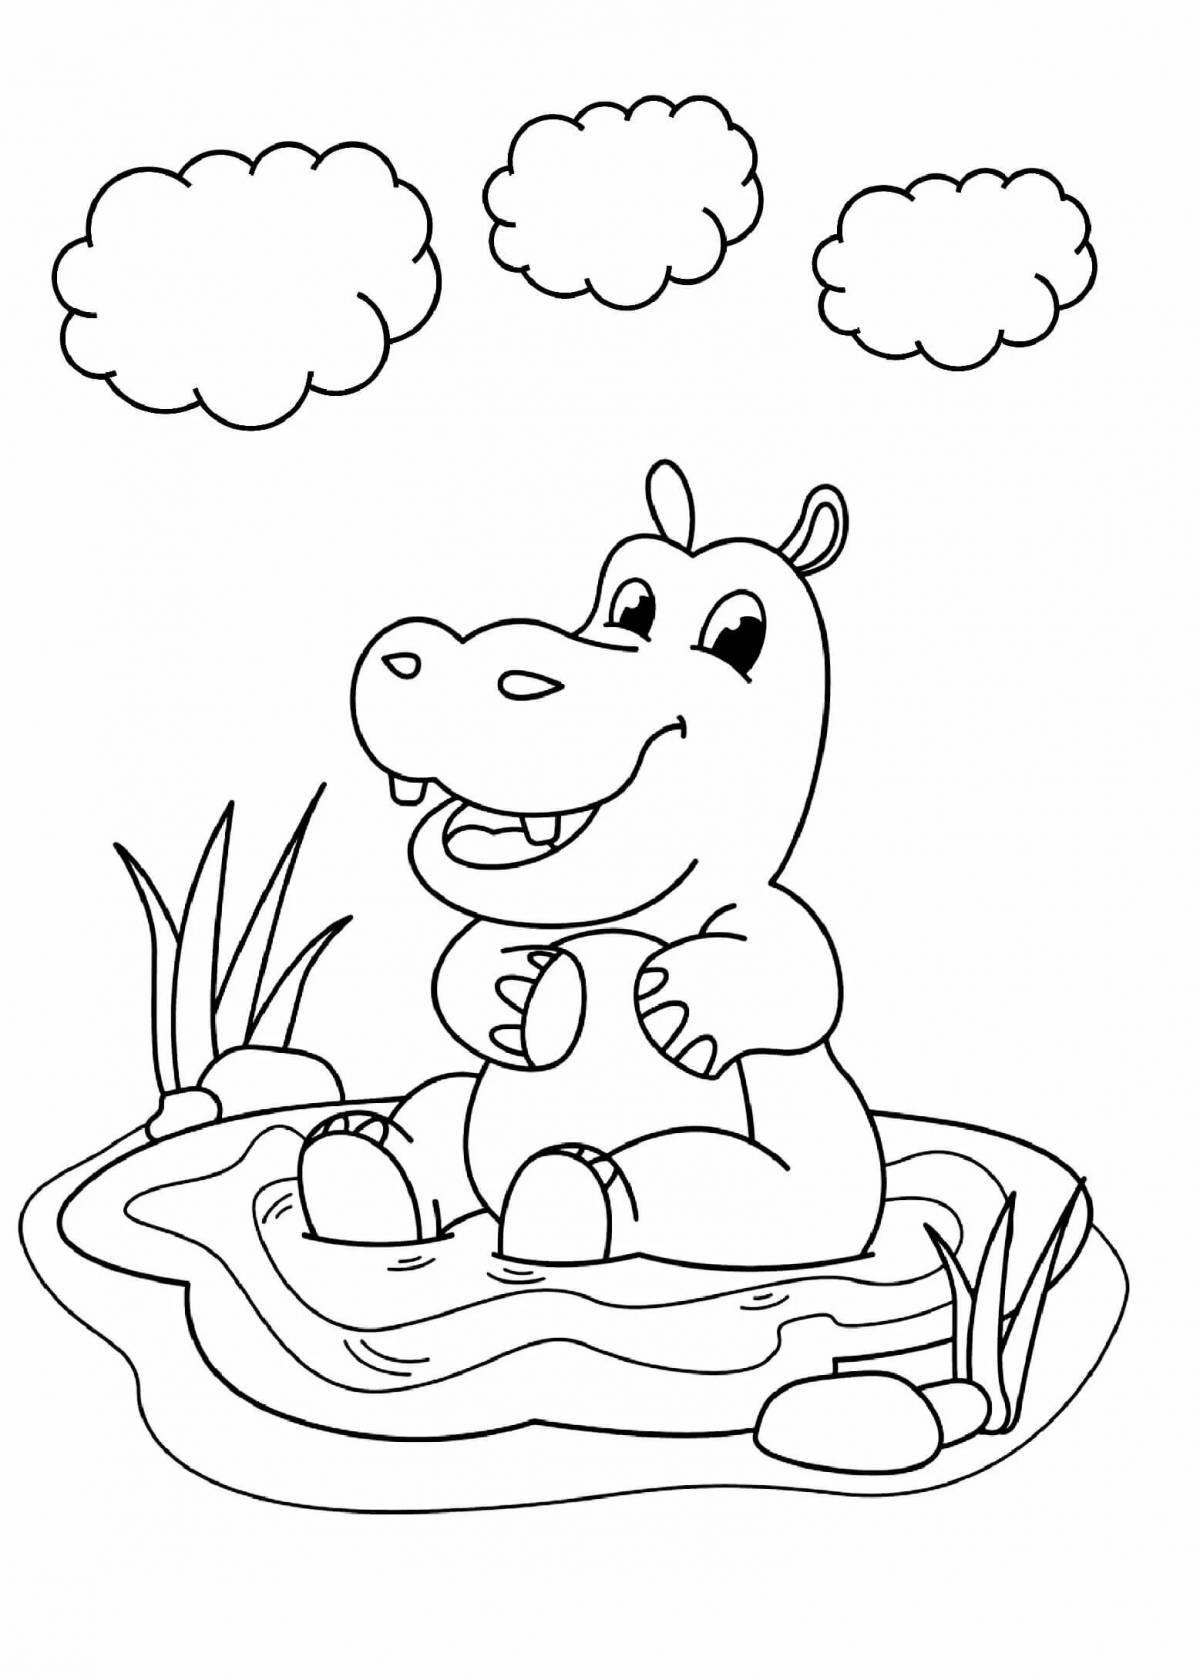 Hippo coloring book for kids